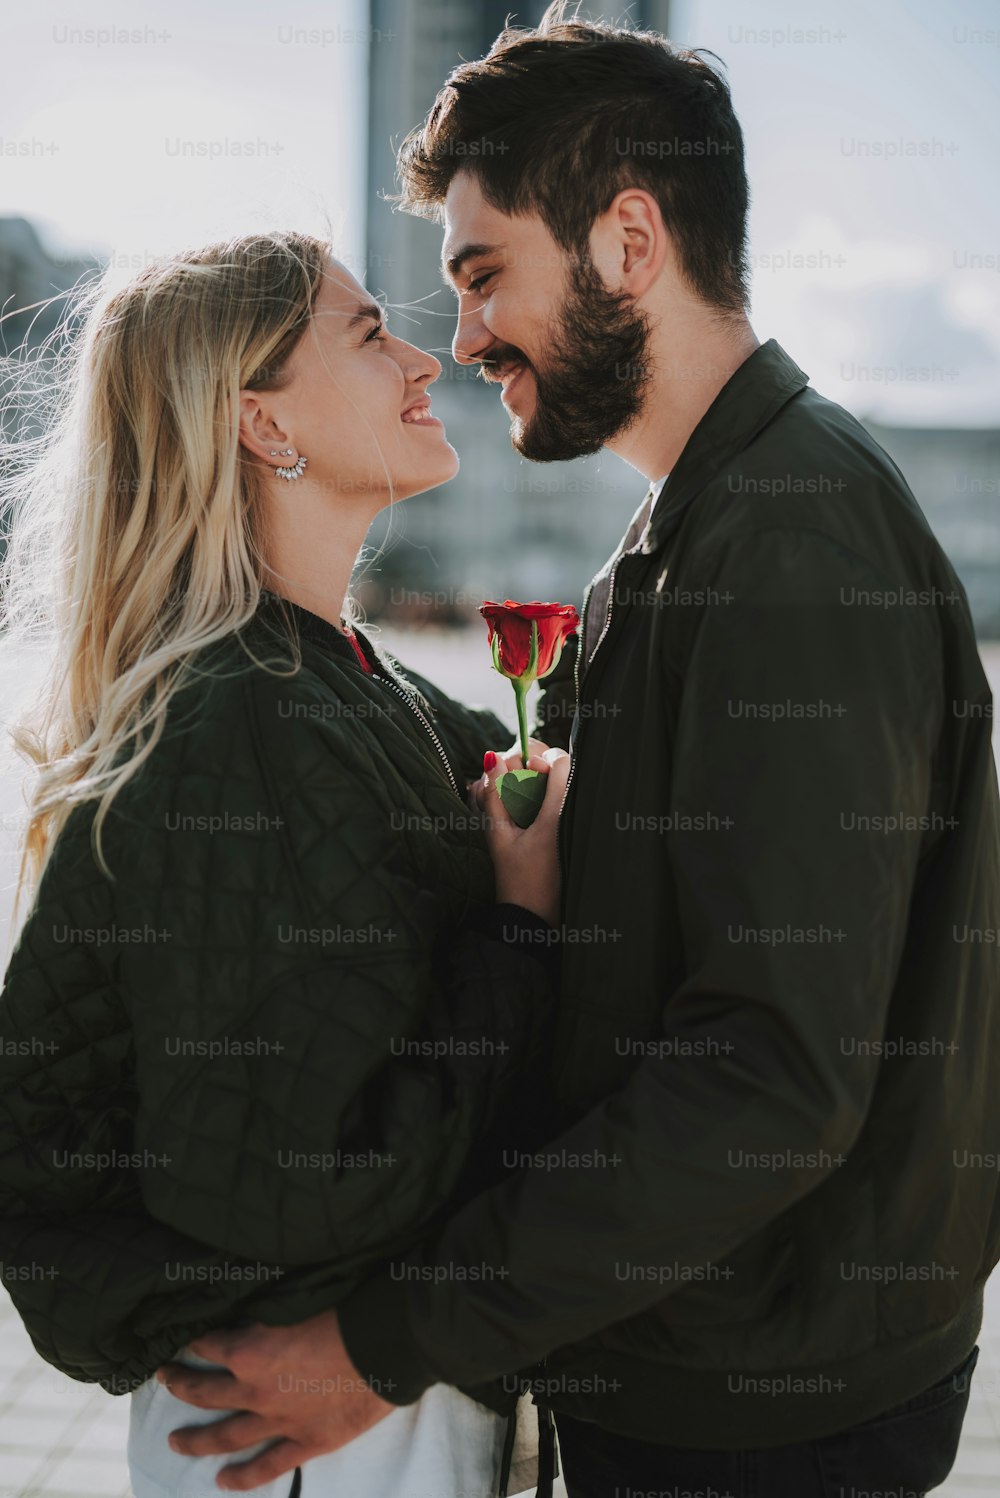 Side view waist up portrait of charming girl with red rose looking at bearded man and smiling